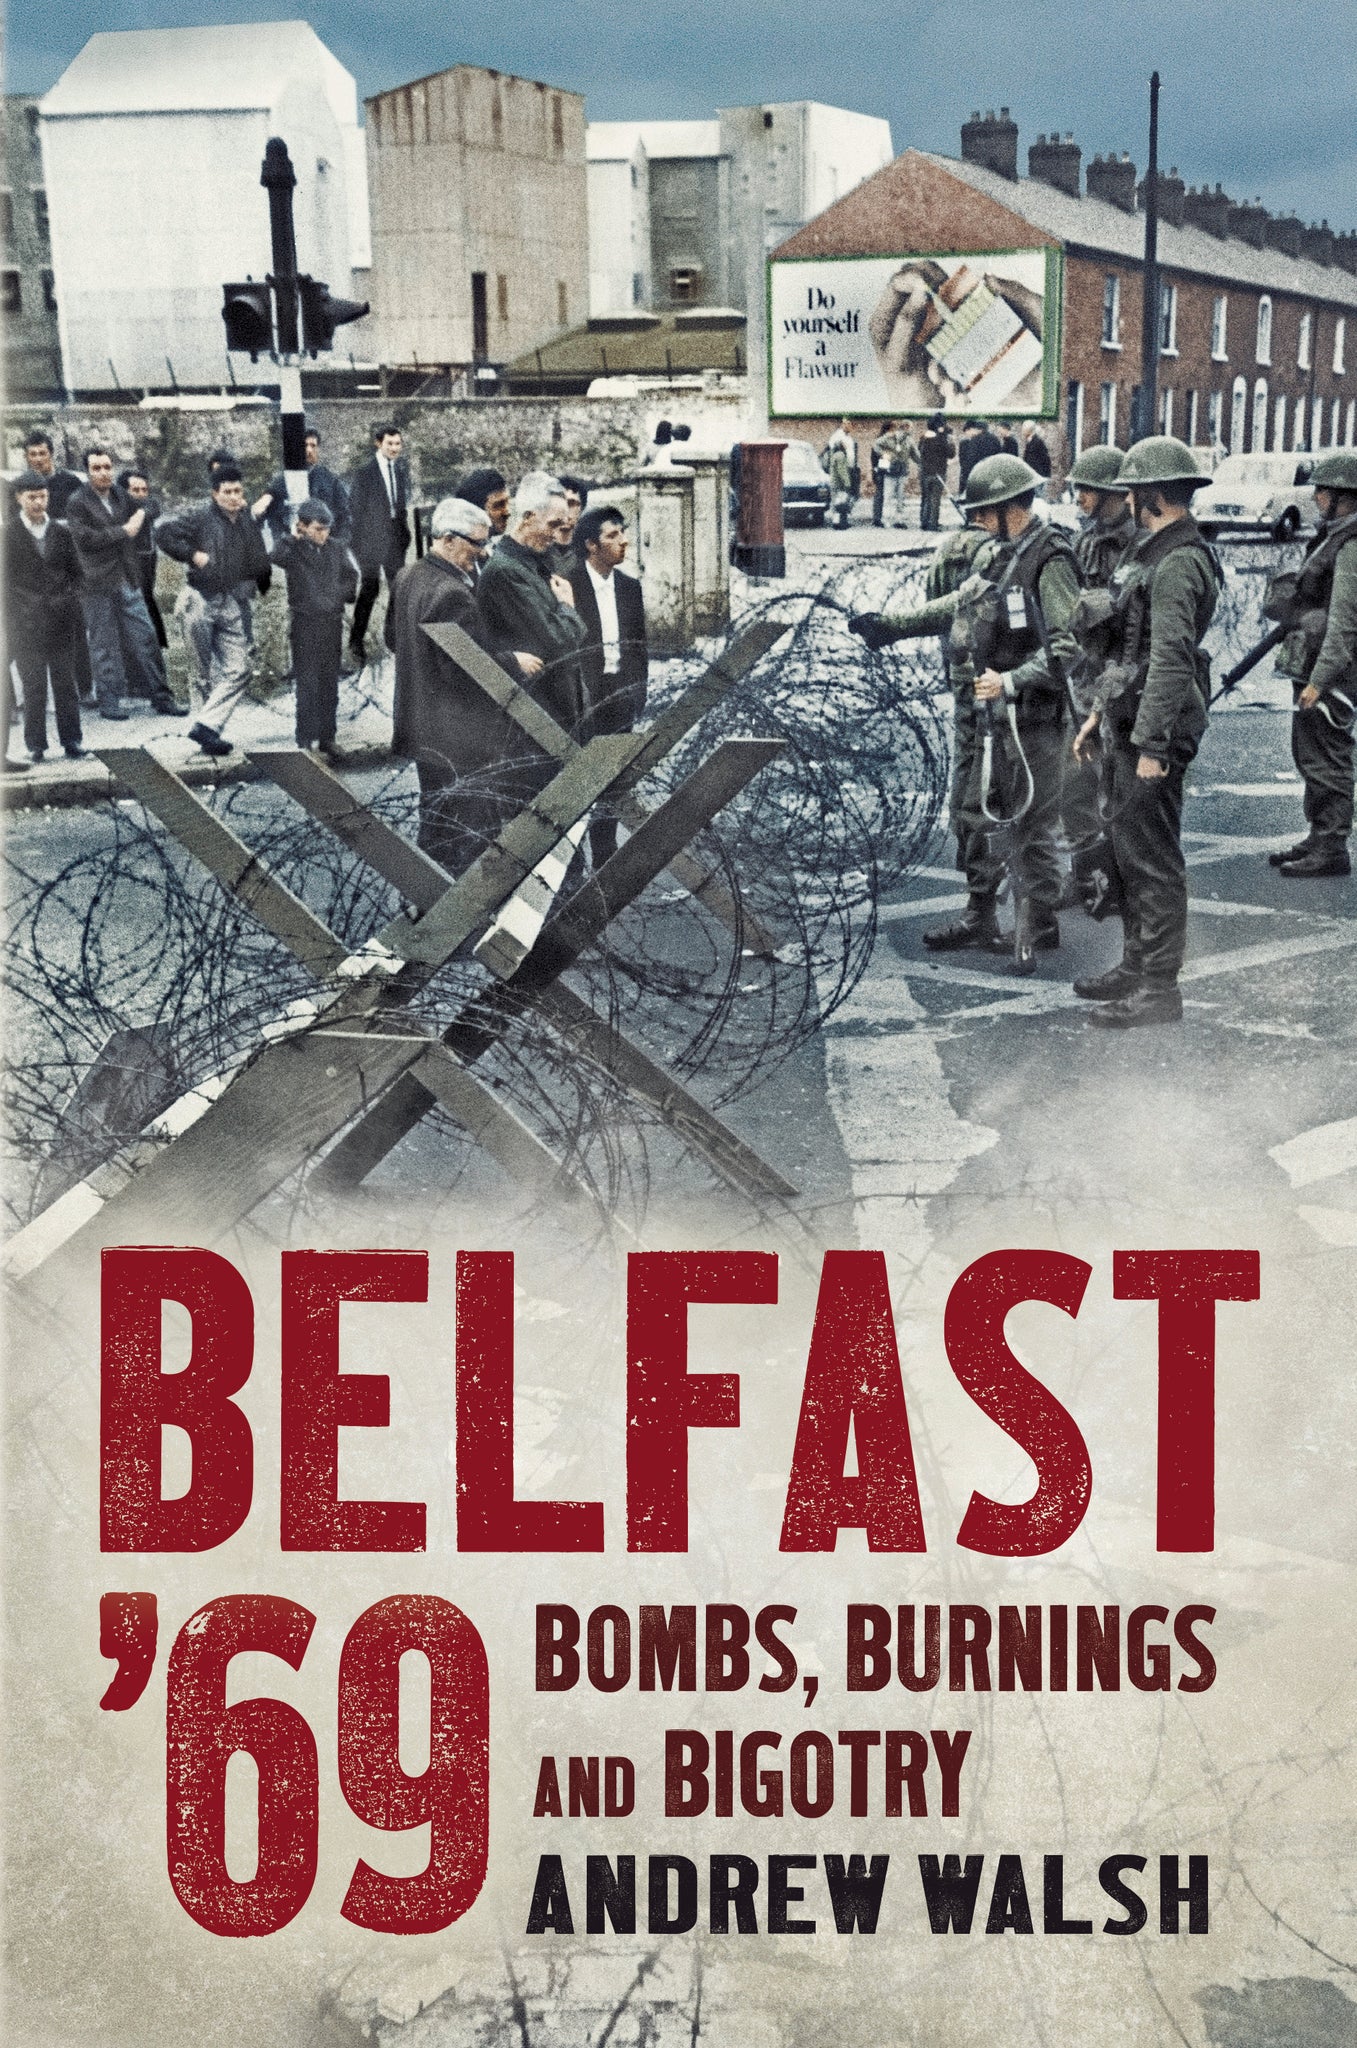 Belfast '69: Bombs, Burnings and Bigotry - available now from Fonthill Media